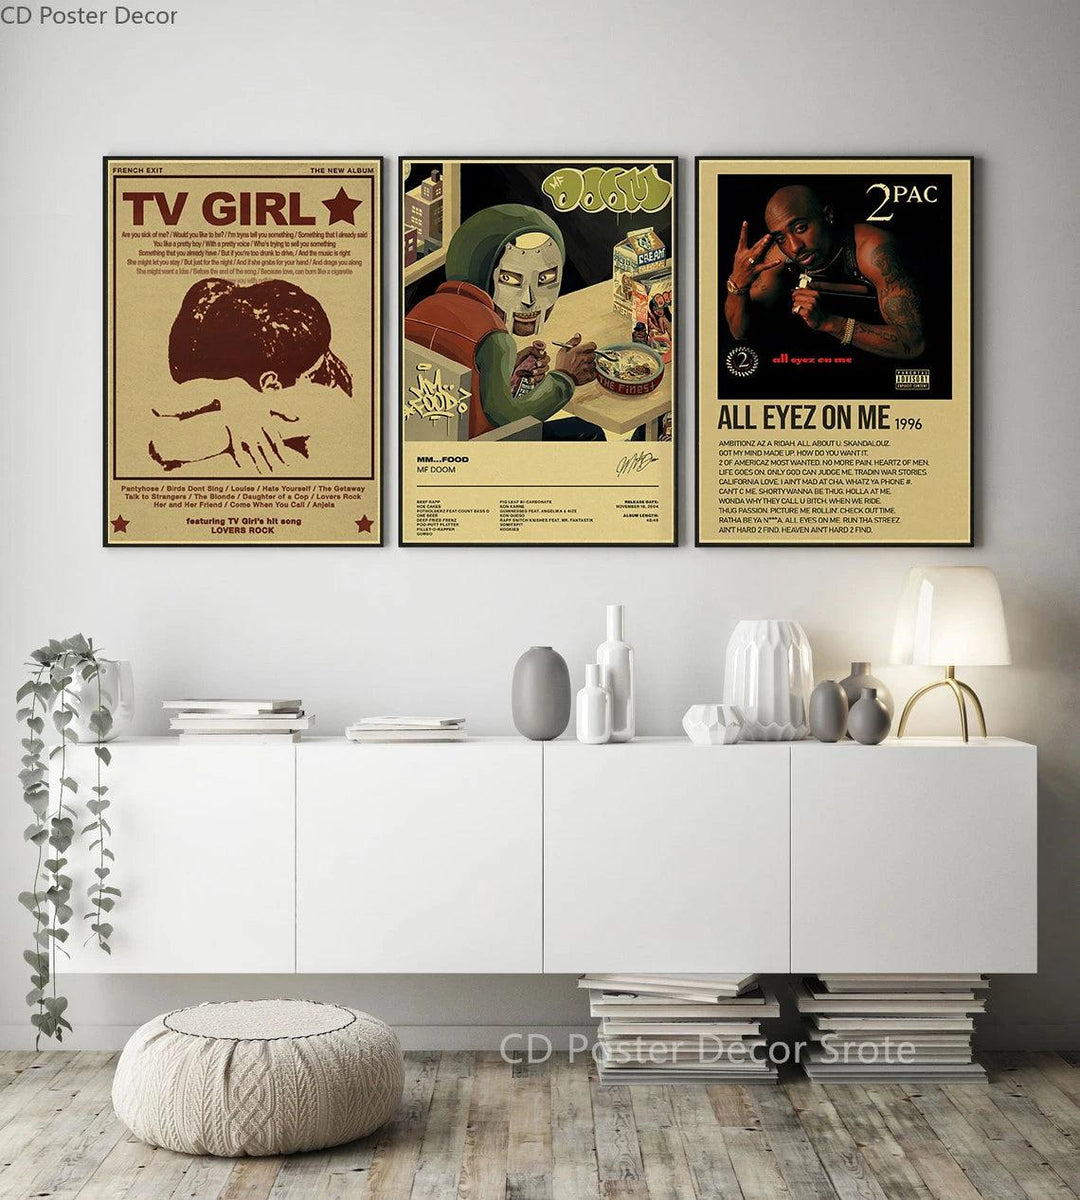 Vintage Music Posters - Singer Wall Art - Retro Home Decor - Brand My Case